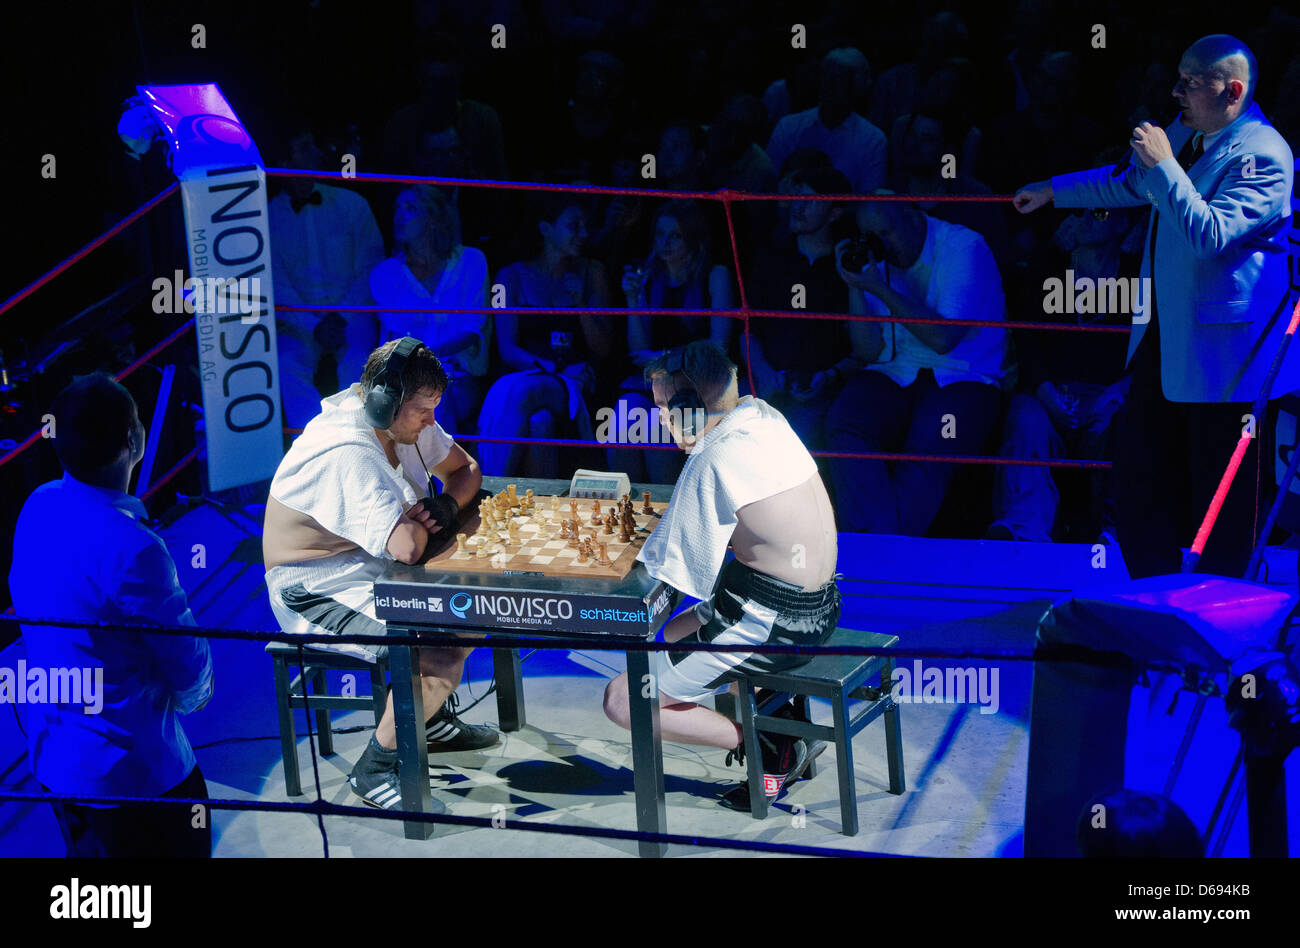 Women's chessboxing title match controversy (1st and only